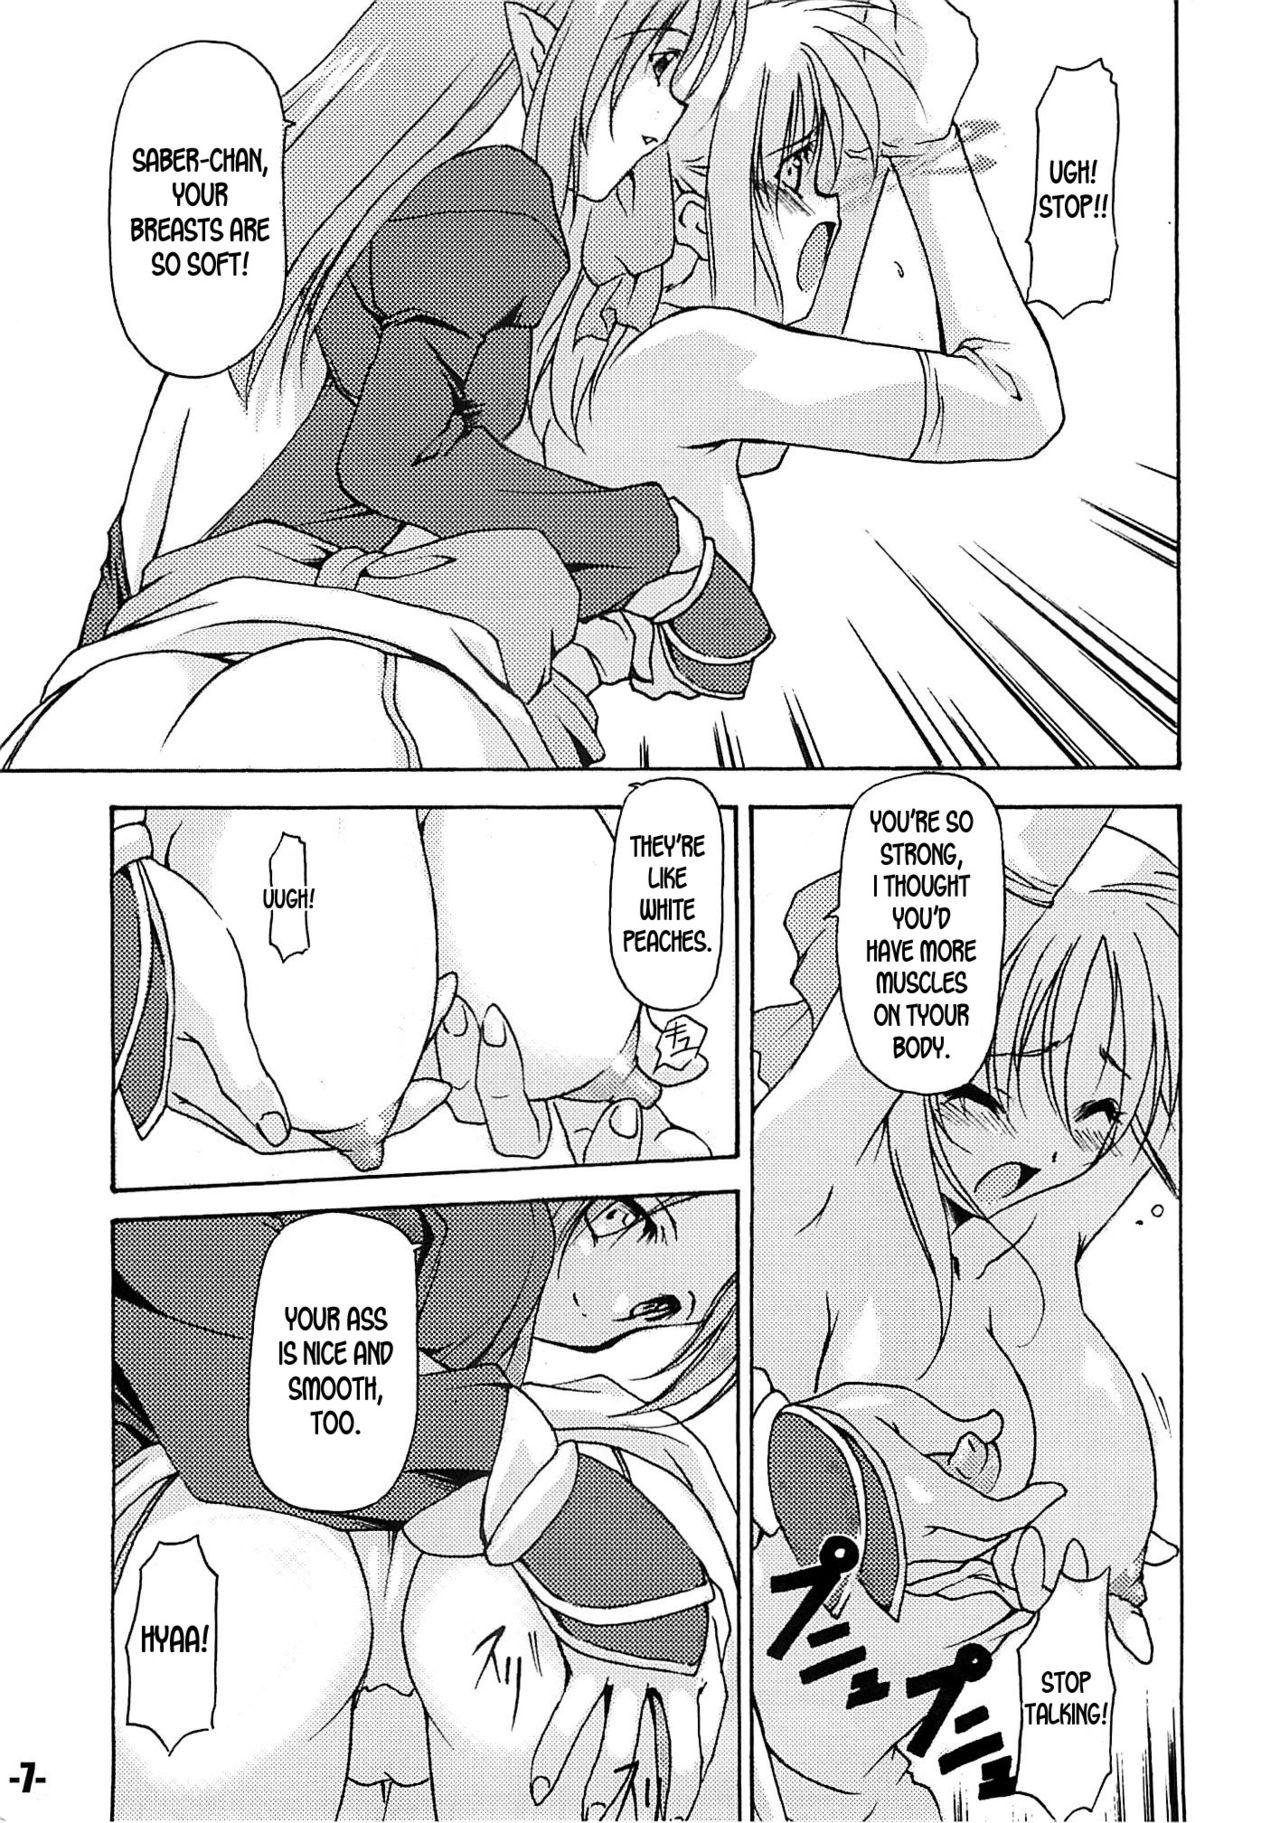 Anime EXtra stage vol. 13 - Fate stay night Squirting - Page 6